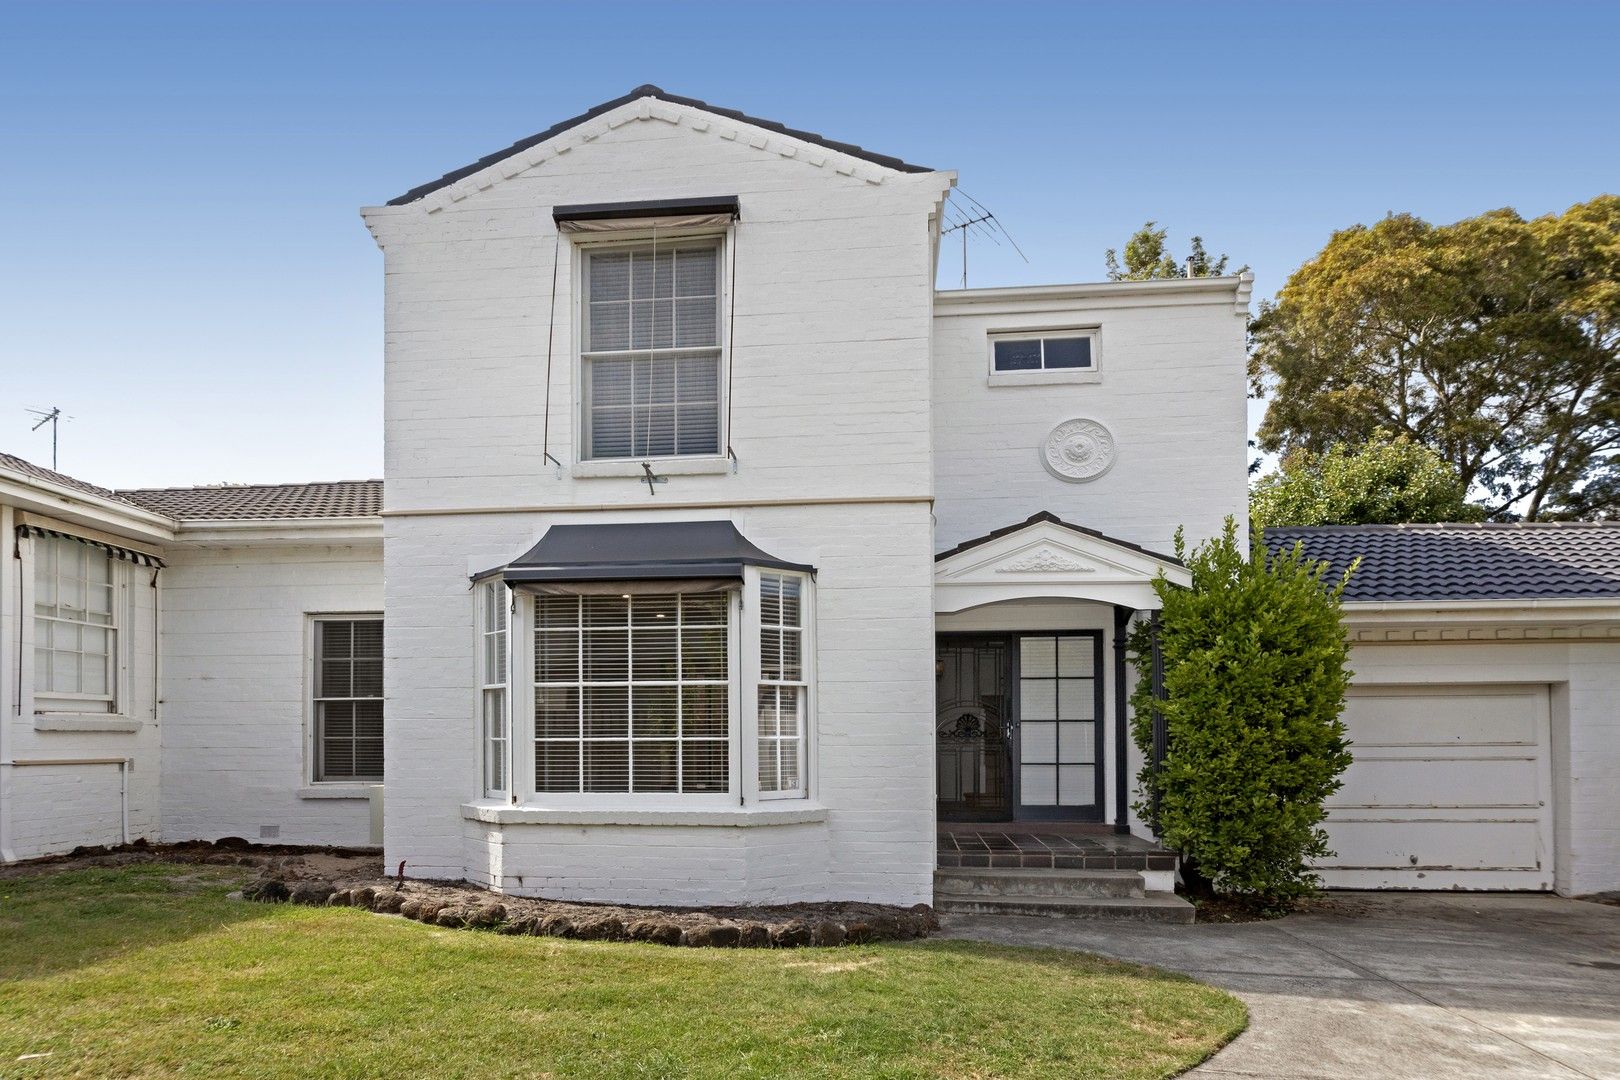 2 bedrooms Townhouse in 2/4 Boxshall Street BRIGHTON VIC, 3186